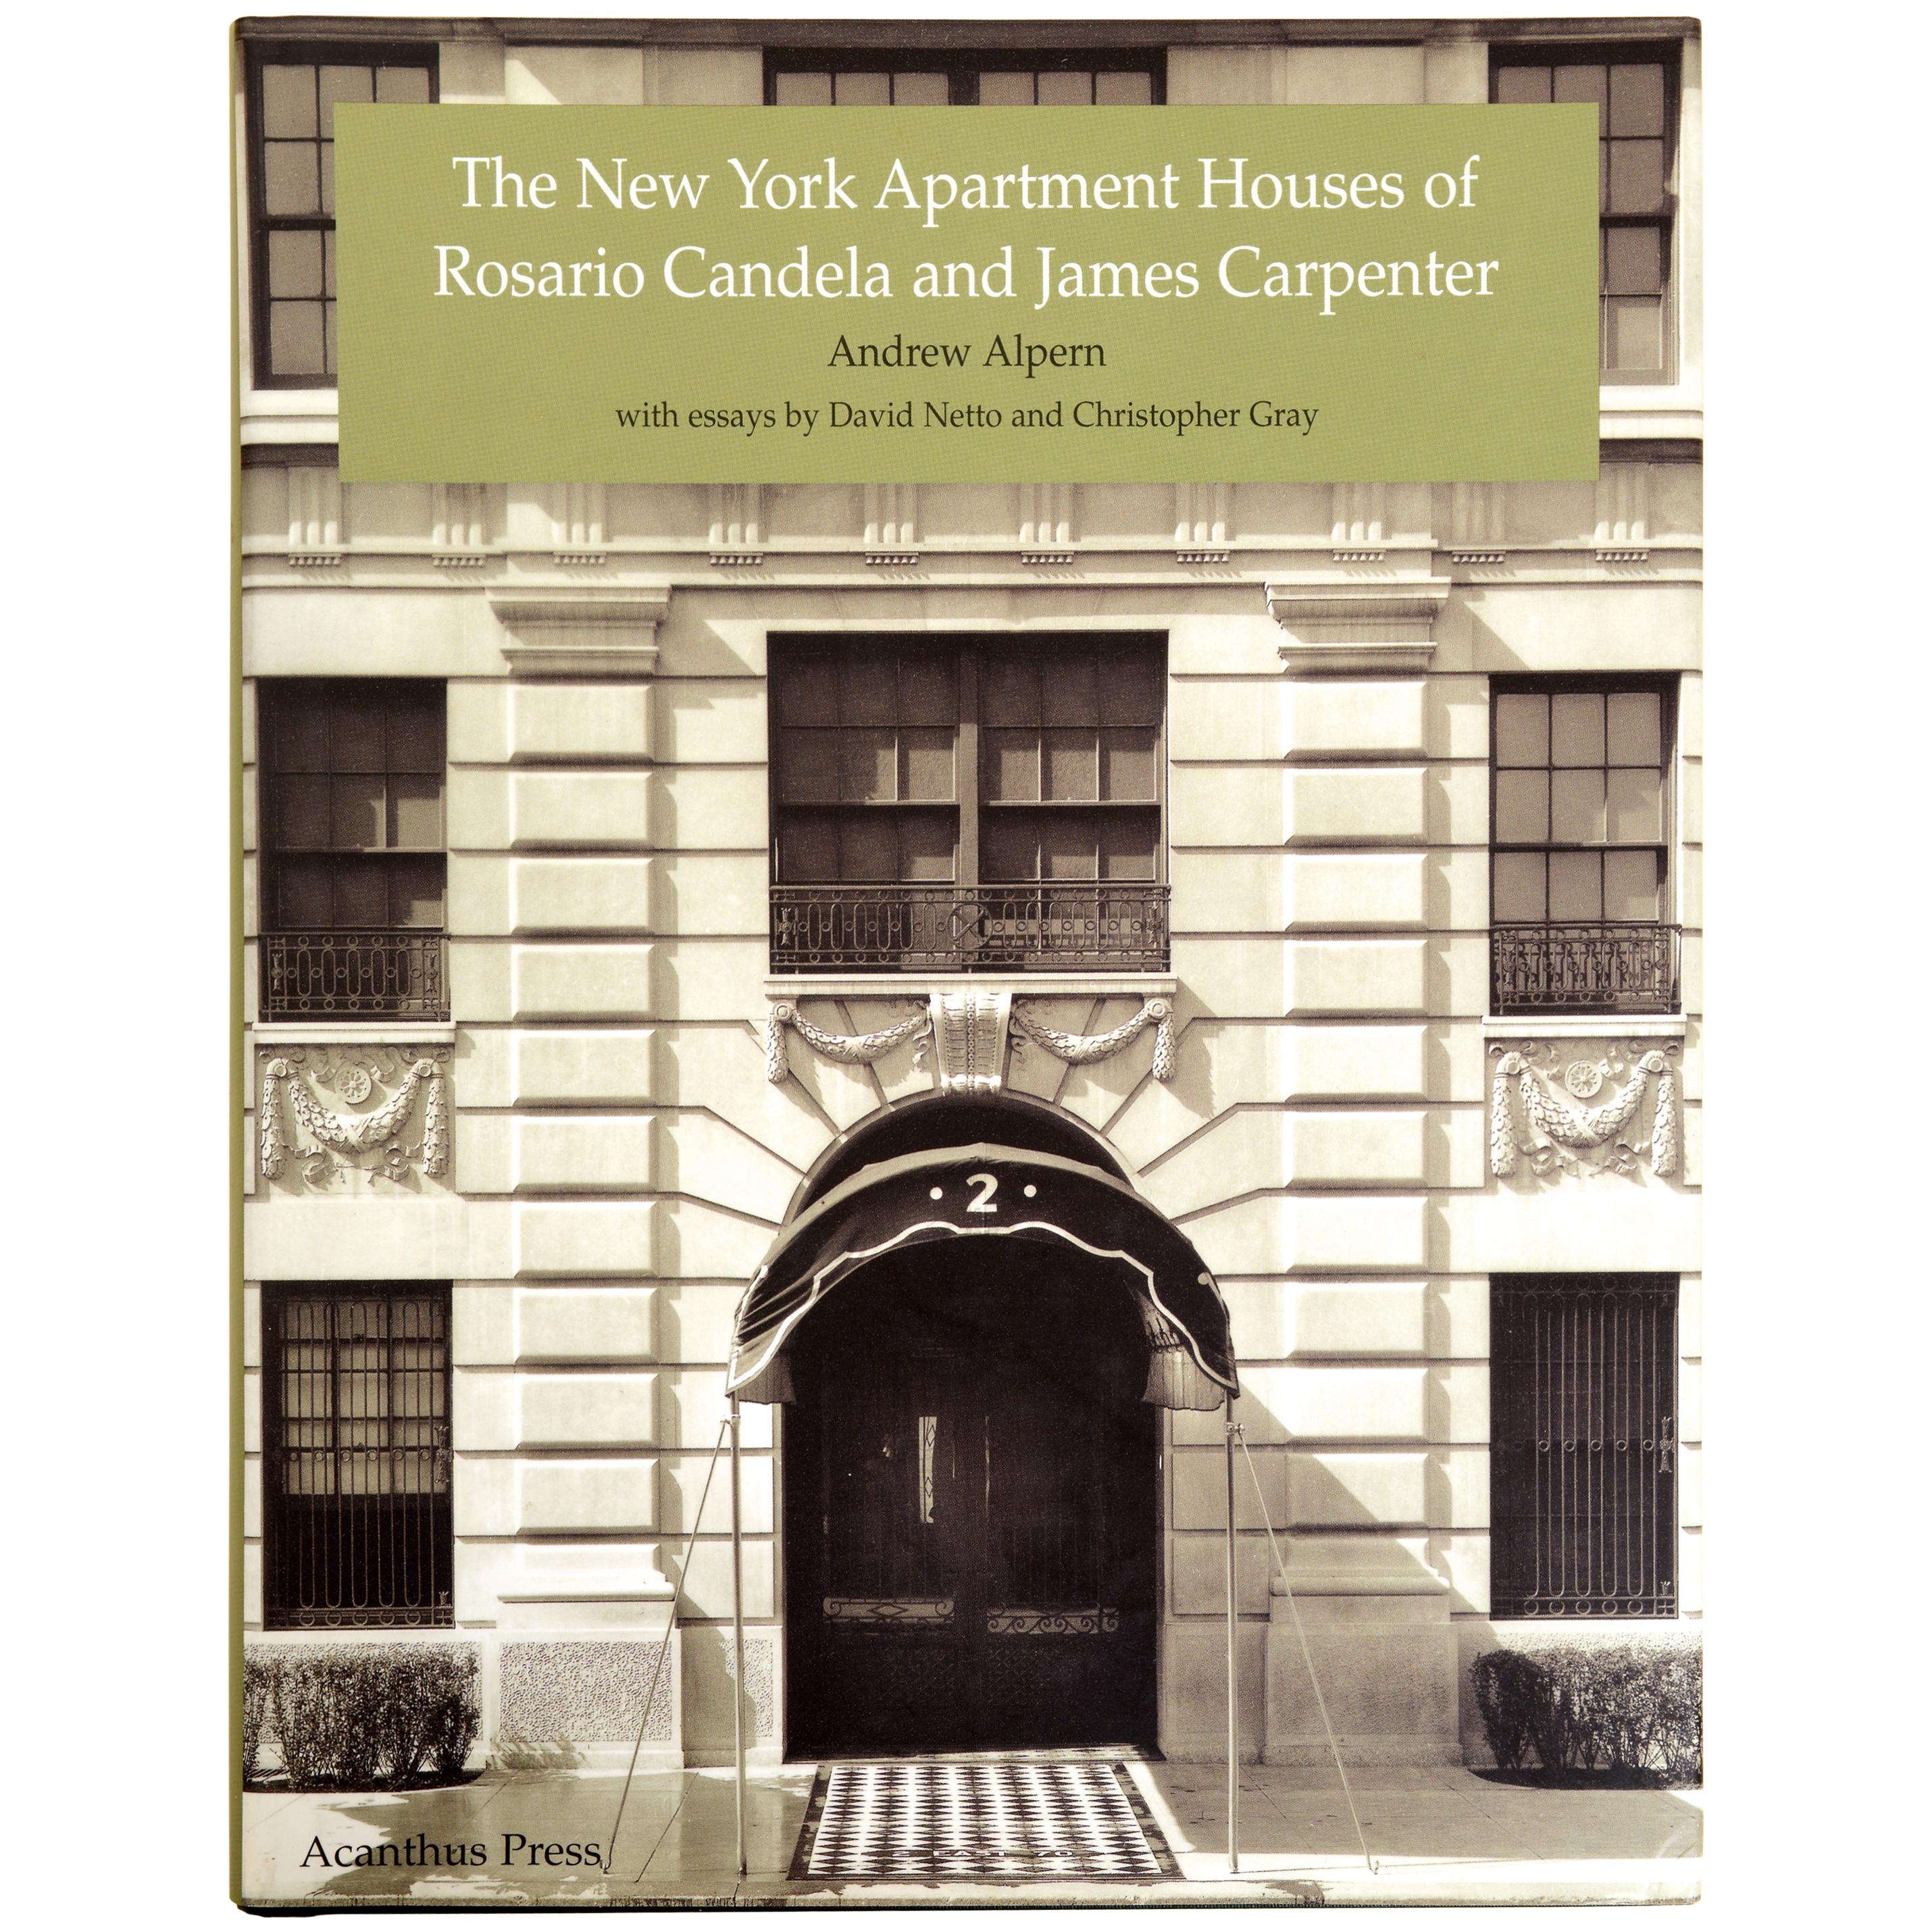 The New York Apartment Houses of Rosario Candela and James Carpenter, 1st Ed